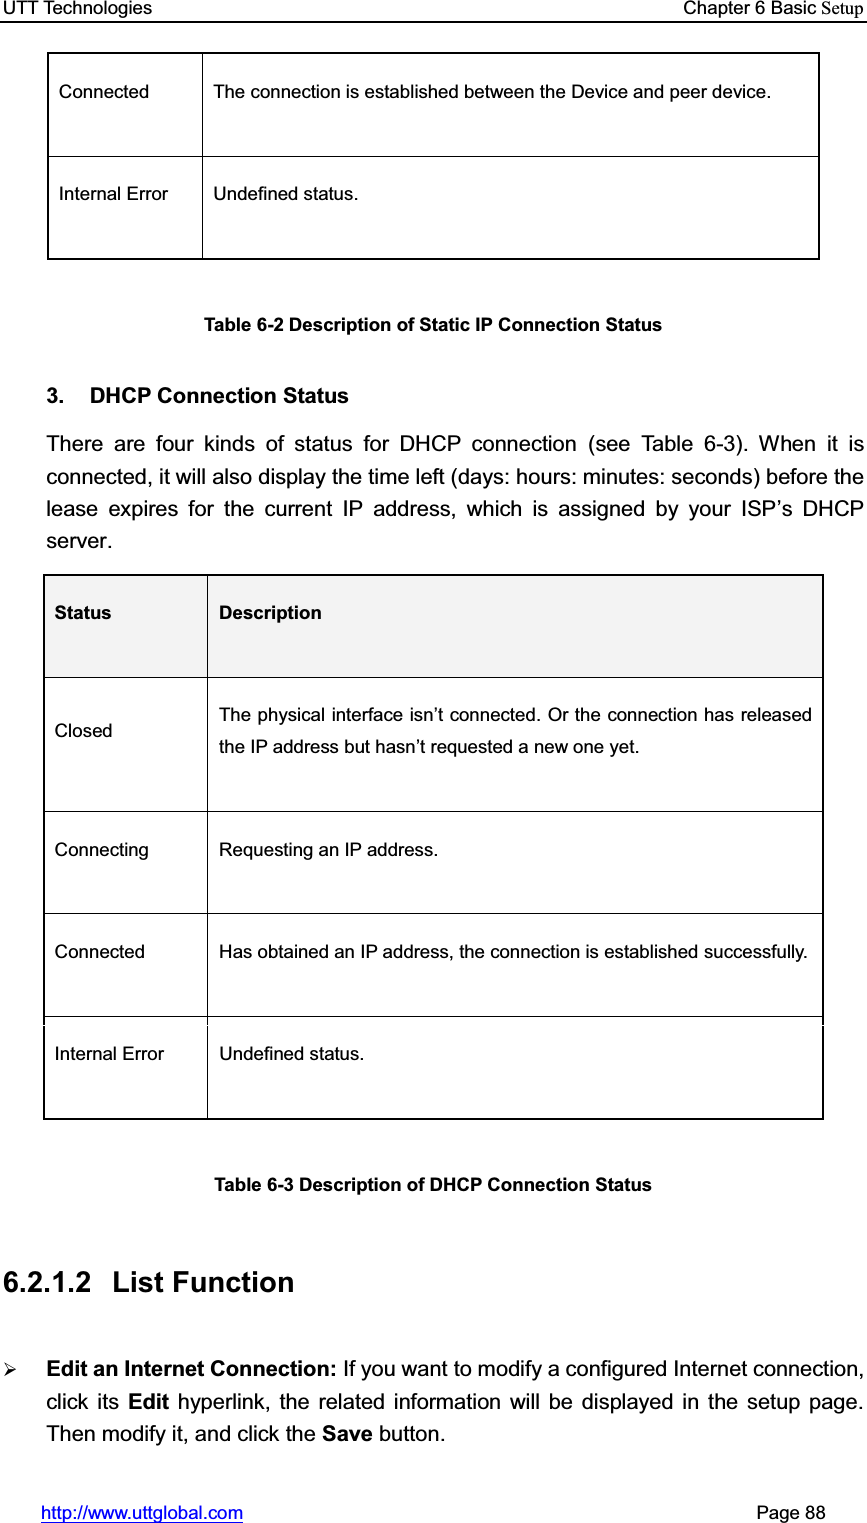 UTT Technologies    Chapter 6 Basic Setuphttp://www.uttglobal.com                                                       Page 88 Connected  The connection is established between the Device and peer device. Internal Error  Undefined status. Table 6-2 Description of Static IP Connection Status3.  DHCP Connection Status There are four kinds of status for DHCP connection (see Table 6-3). When it is connected, it will also display the time left (days: hours: minutes: seconds) before the lease expires for the current IP address, which is assigned by your ISP¶s DHCP server.Status  Description Closed  The physical interface isn¶t connected. Or the connection has released the IP address but hasn¶t requested a new one yet.   Connecting  Requesting an IP address. Connected  Has obtained an IP address, the connection is established successfully. Internal Error  Undefined status. Table 6-3 Description of DHCP Connection Status 6.2.1.2 List Function ¾Edit an Internet Connection: If you want to modify a configured Internet connection, click its Edit hyperlink, the related information will be displayed in the setup page. Then modify it, and click the Save button.